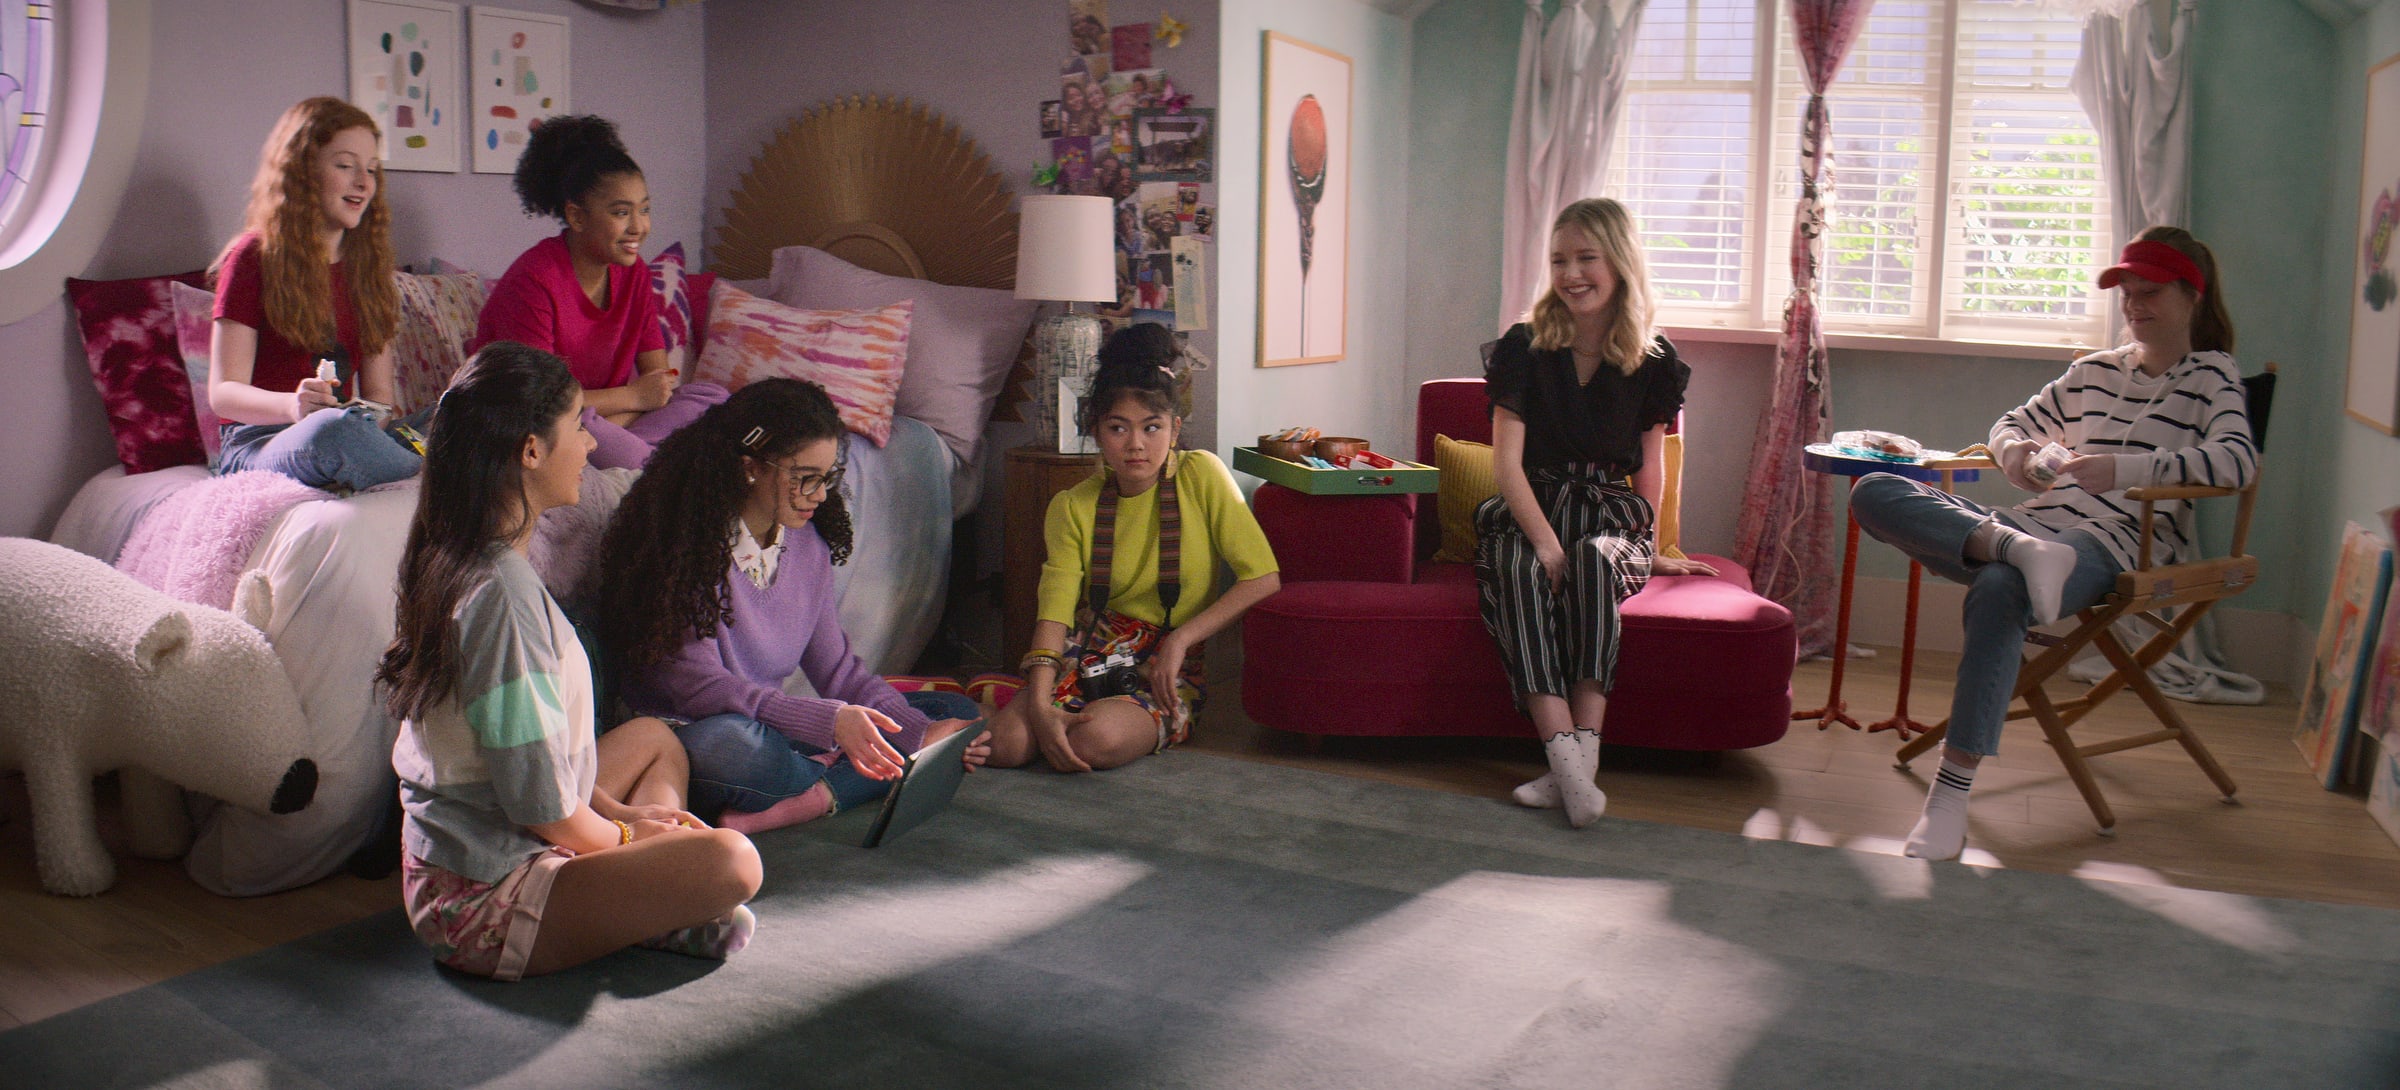 The BSC is back - The Baby-Sitters Club Season 2 Episode 1 - TV Fanatic